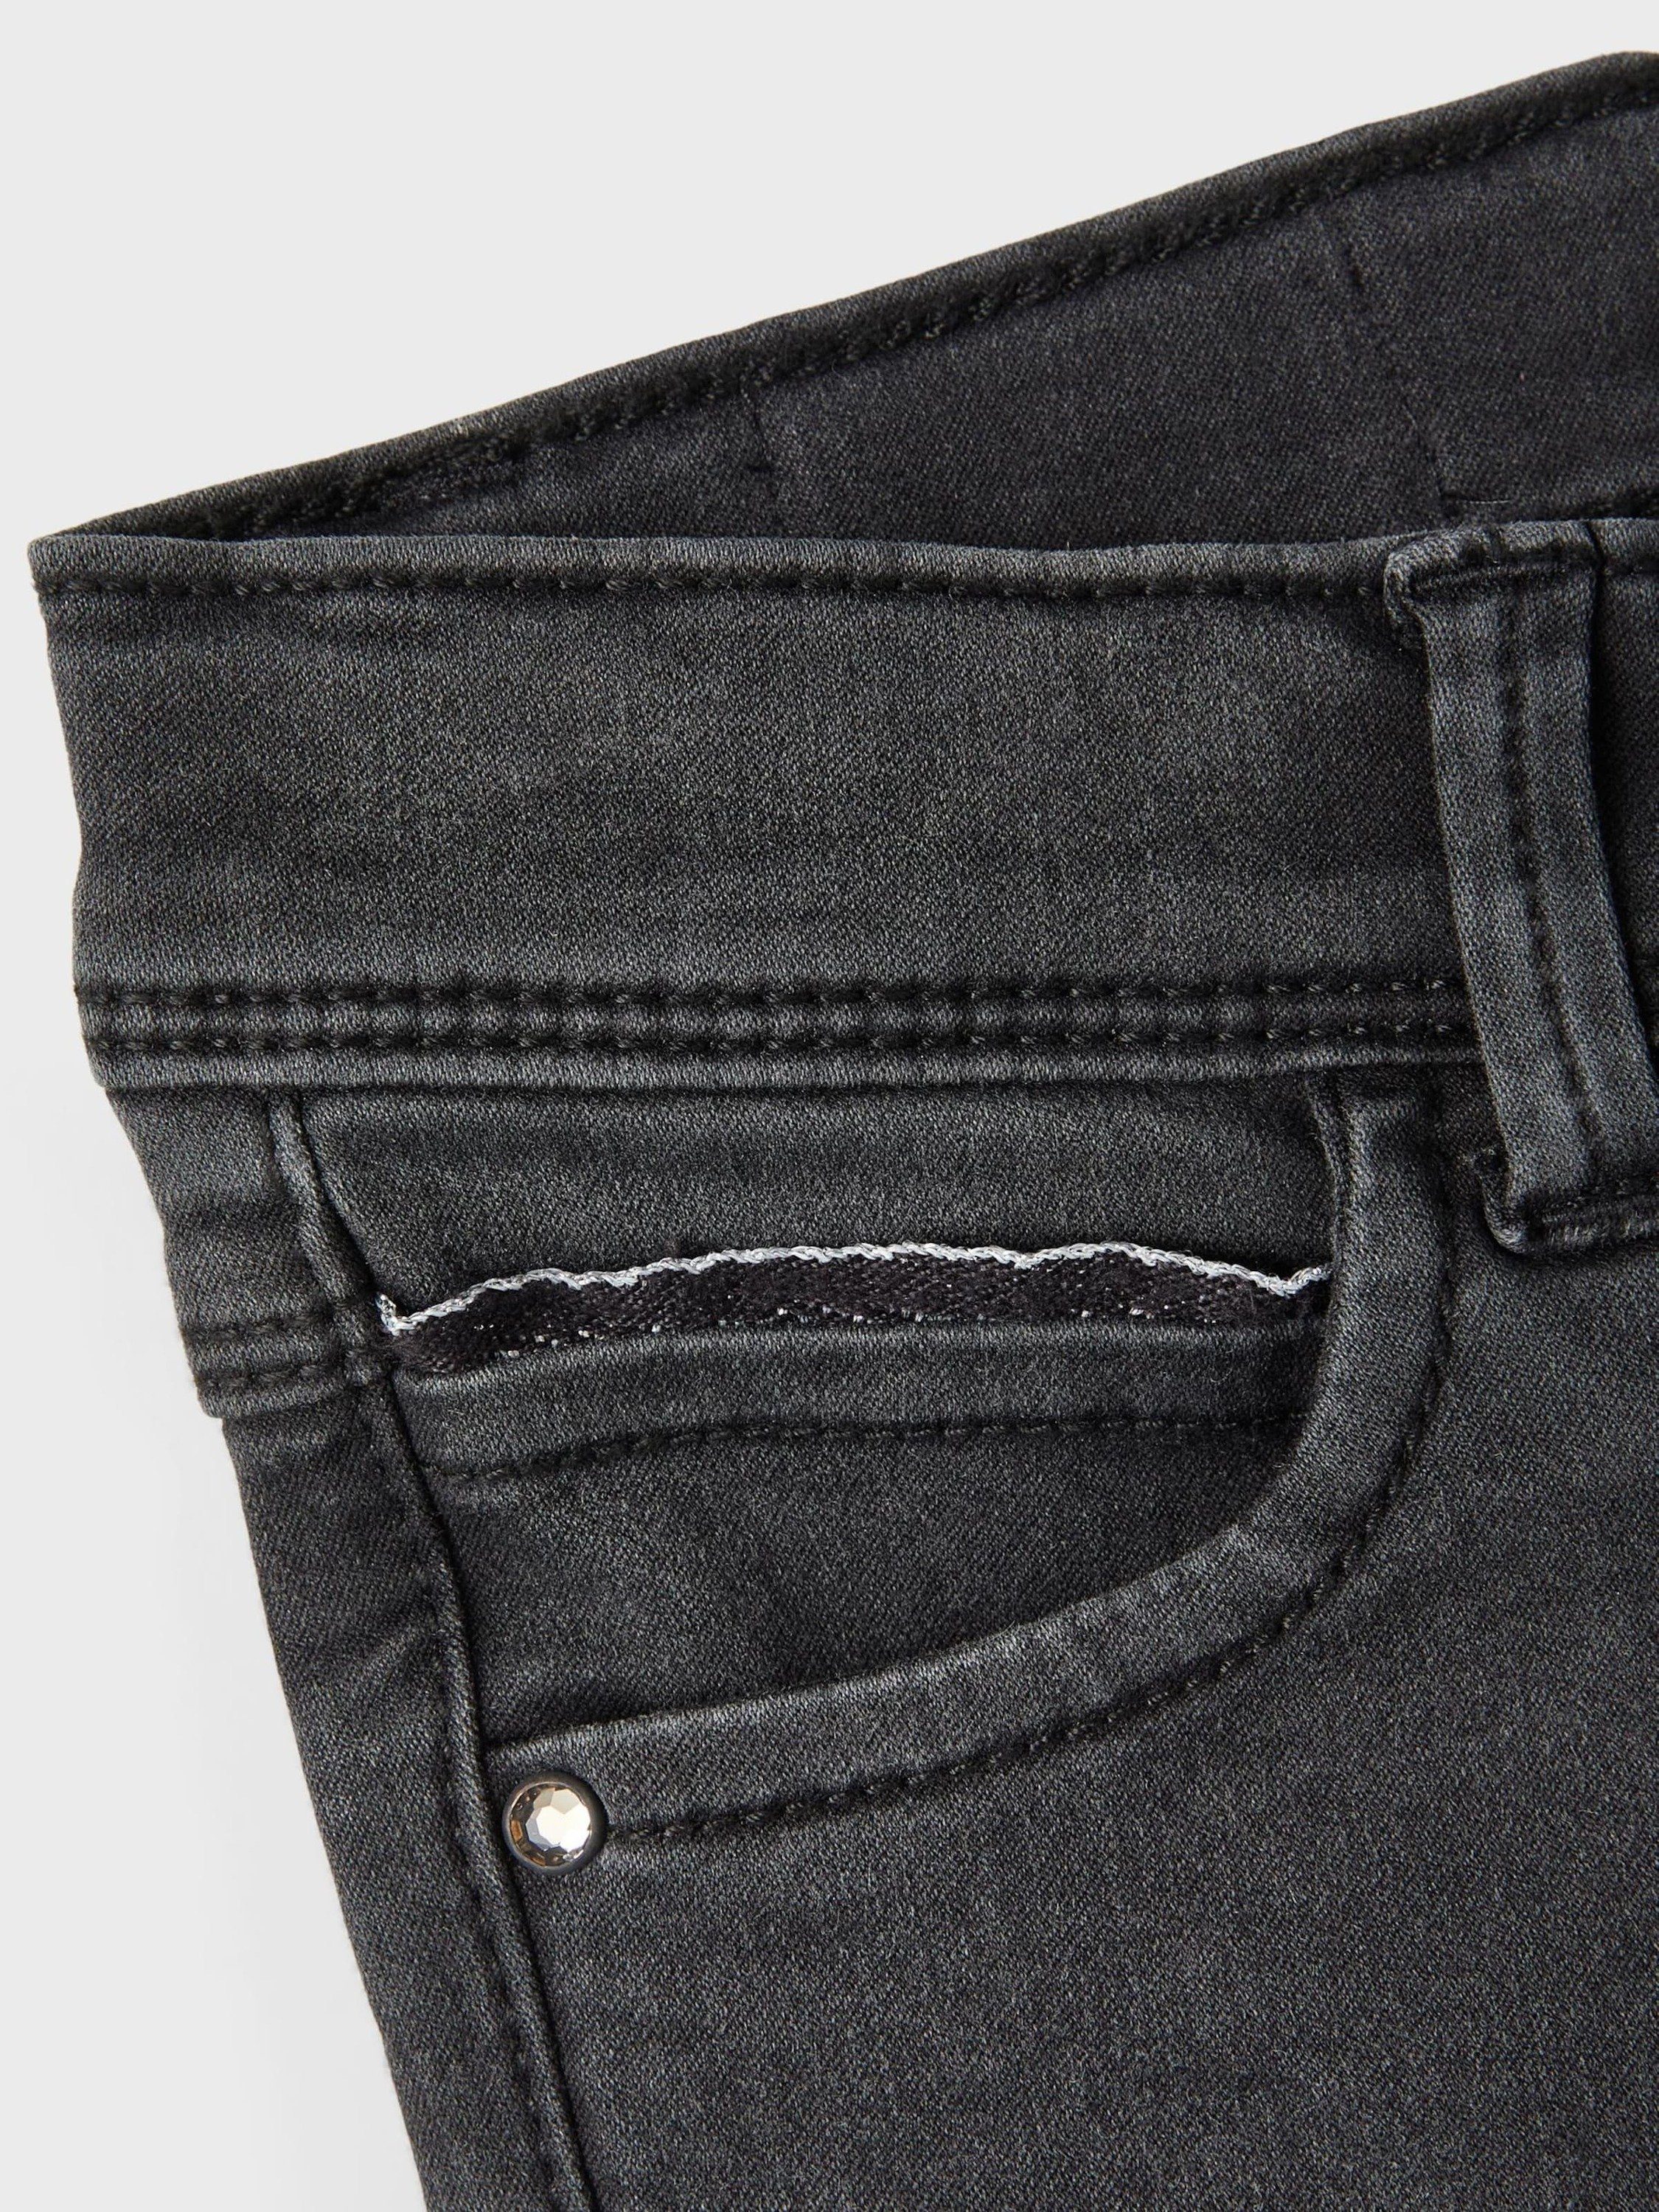 Name Polly (1-tlg) Details Weiteres Plain/ohne Slim-fit-Jeans It Detail,